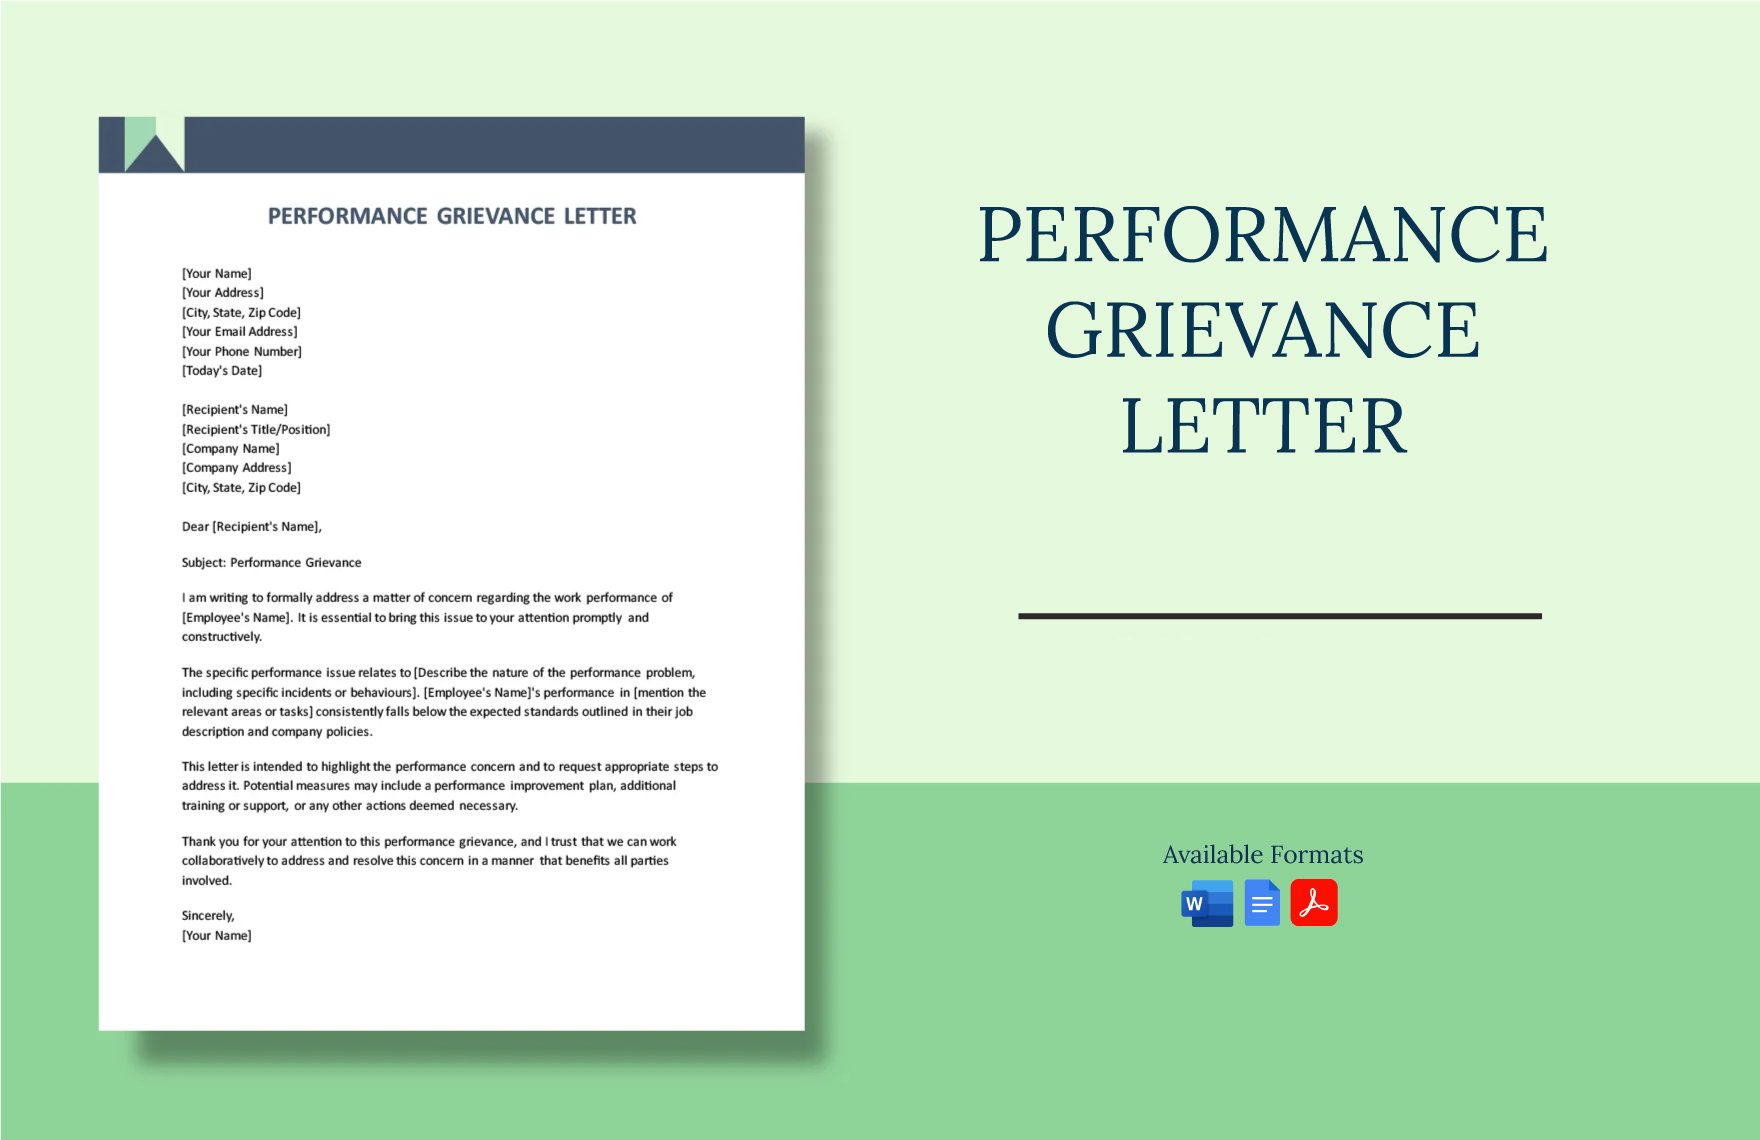 Performance Grievance Letter in Word, Google Docs, PDF